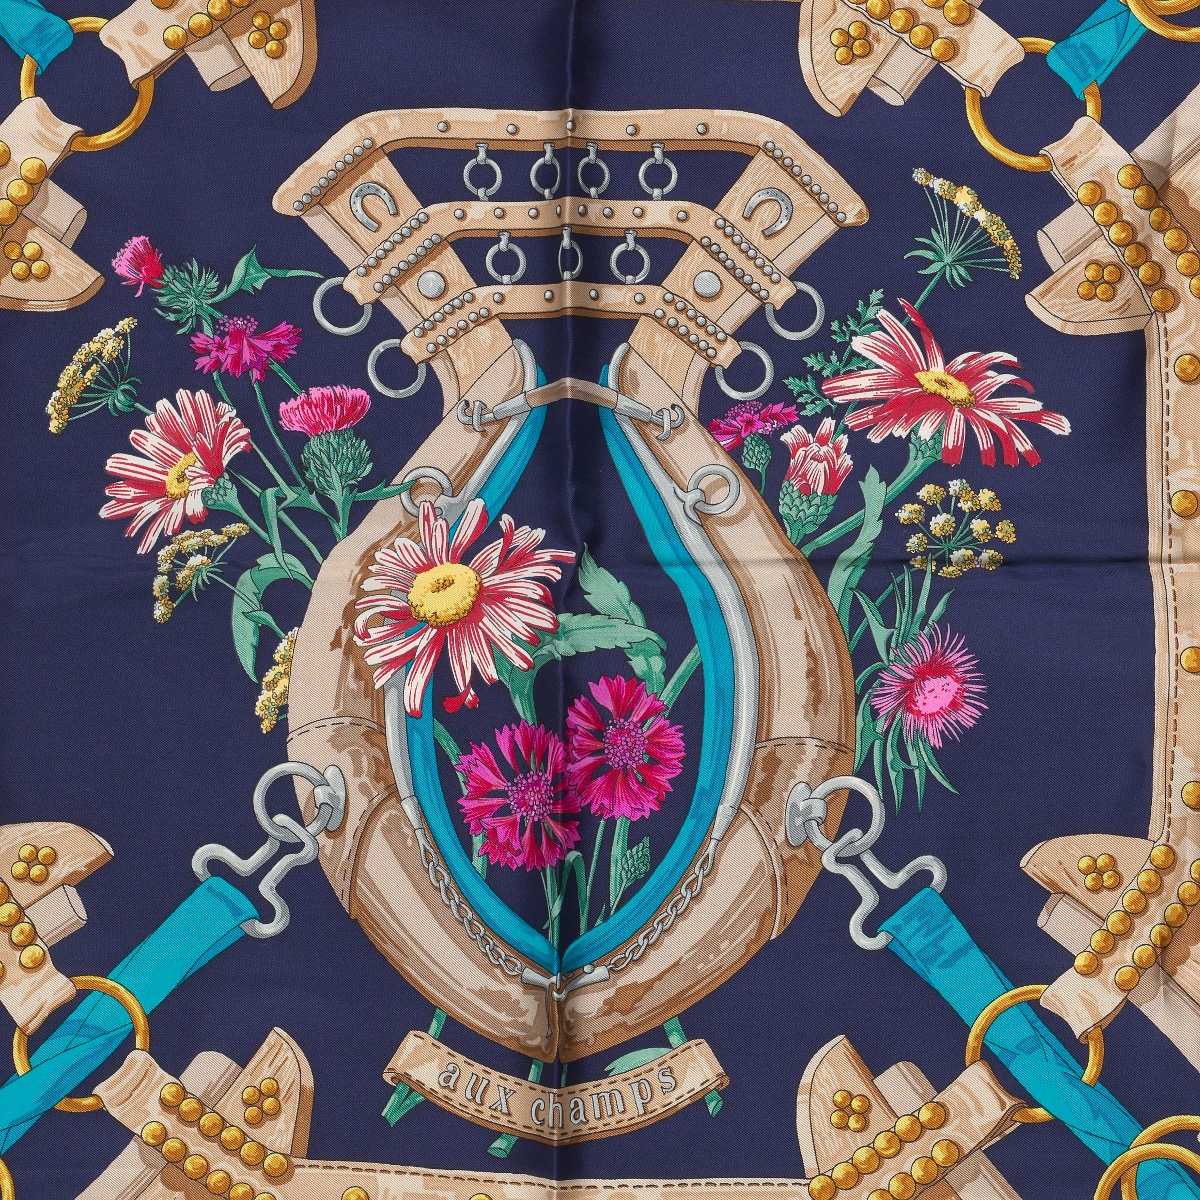 Hermes Silk Twill Scarf ""Aux Champ"" Designed by Caty Latham - Image 2 of 4